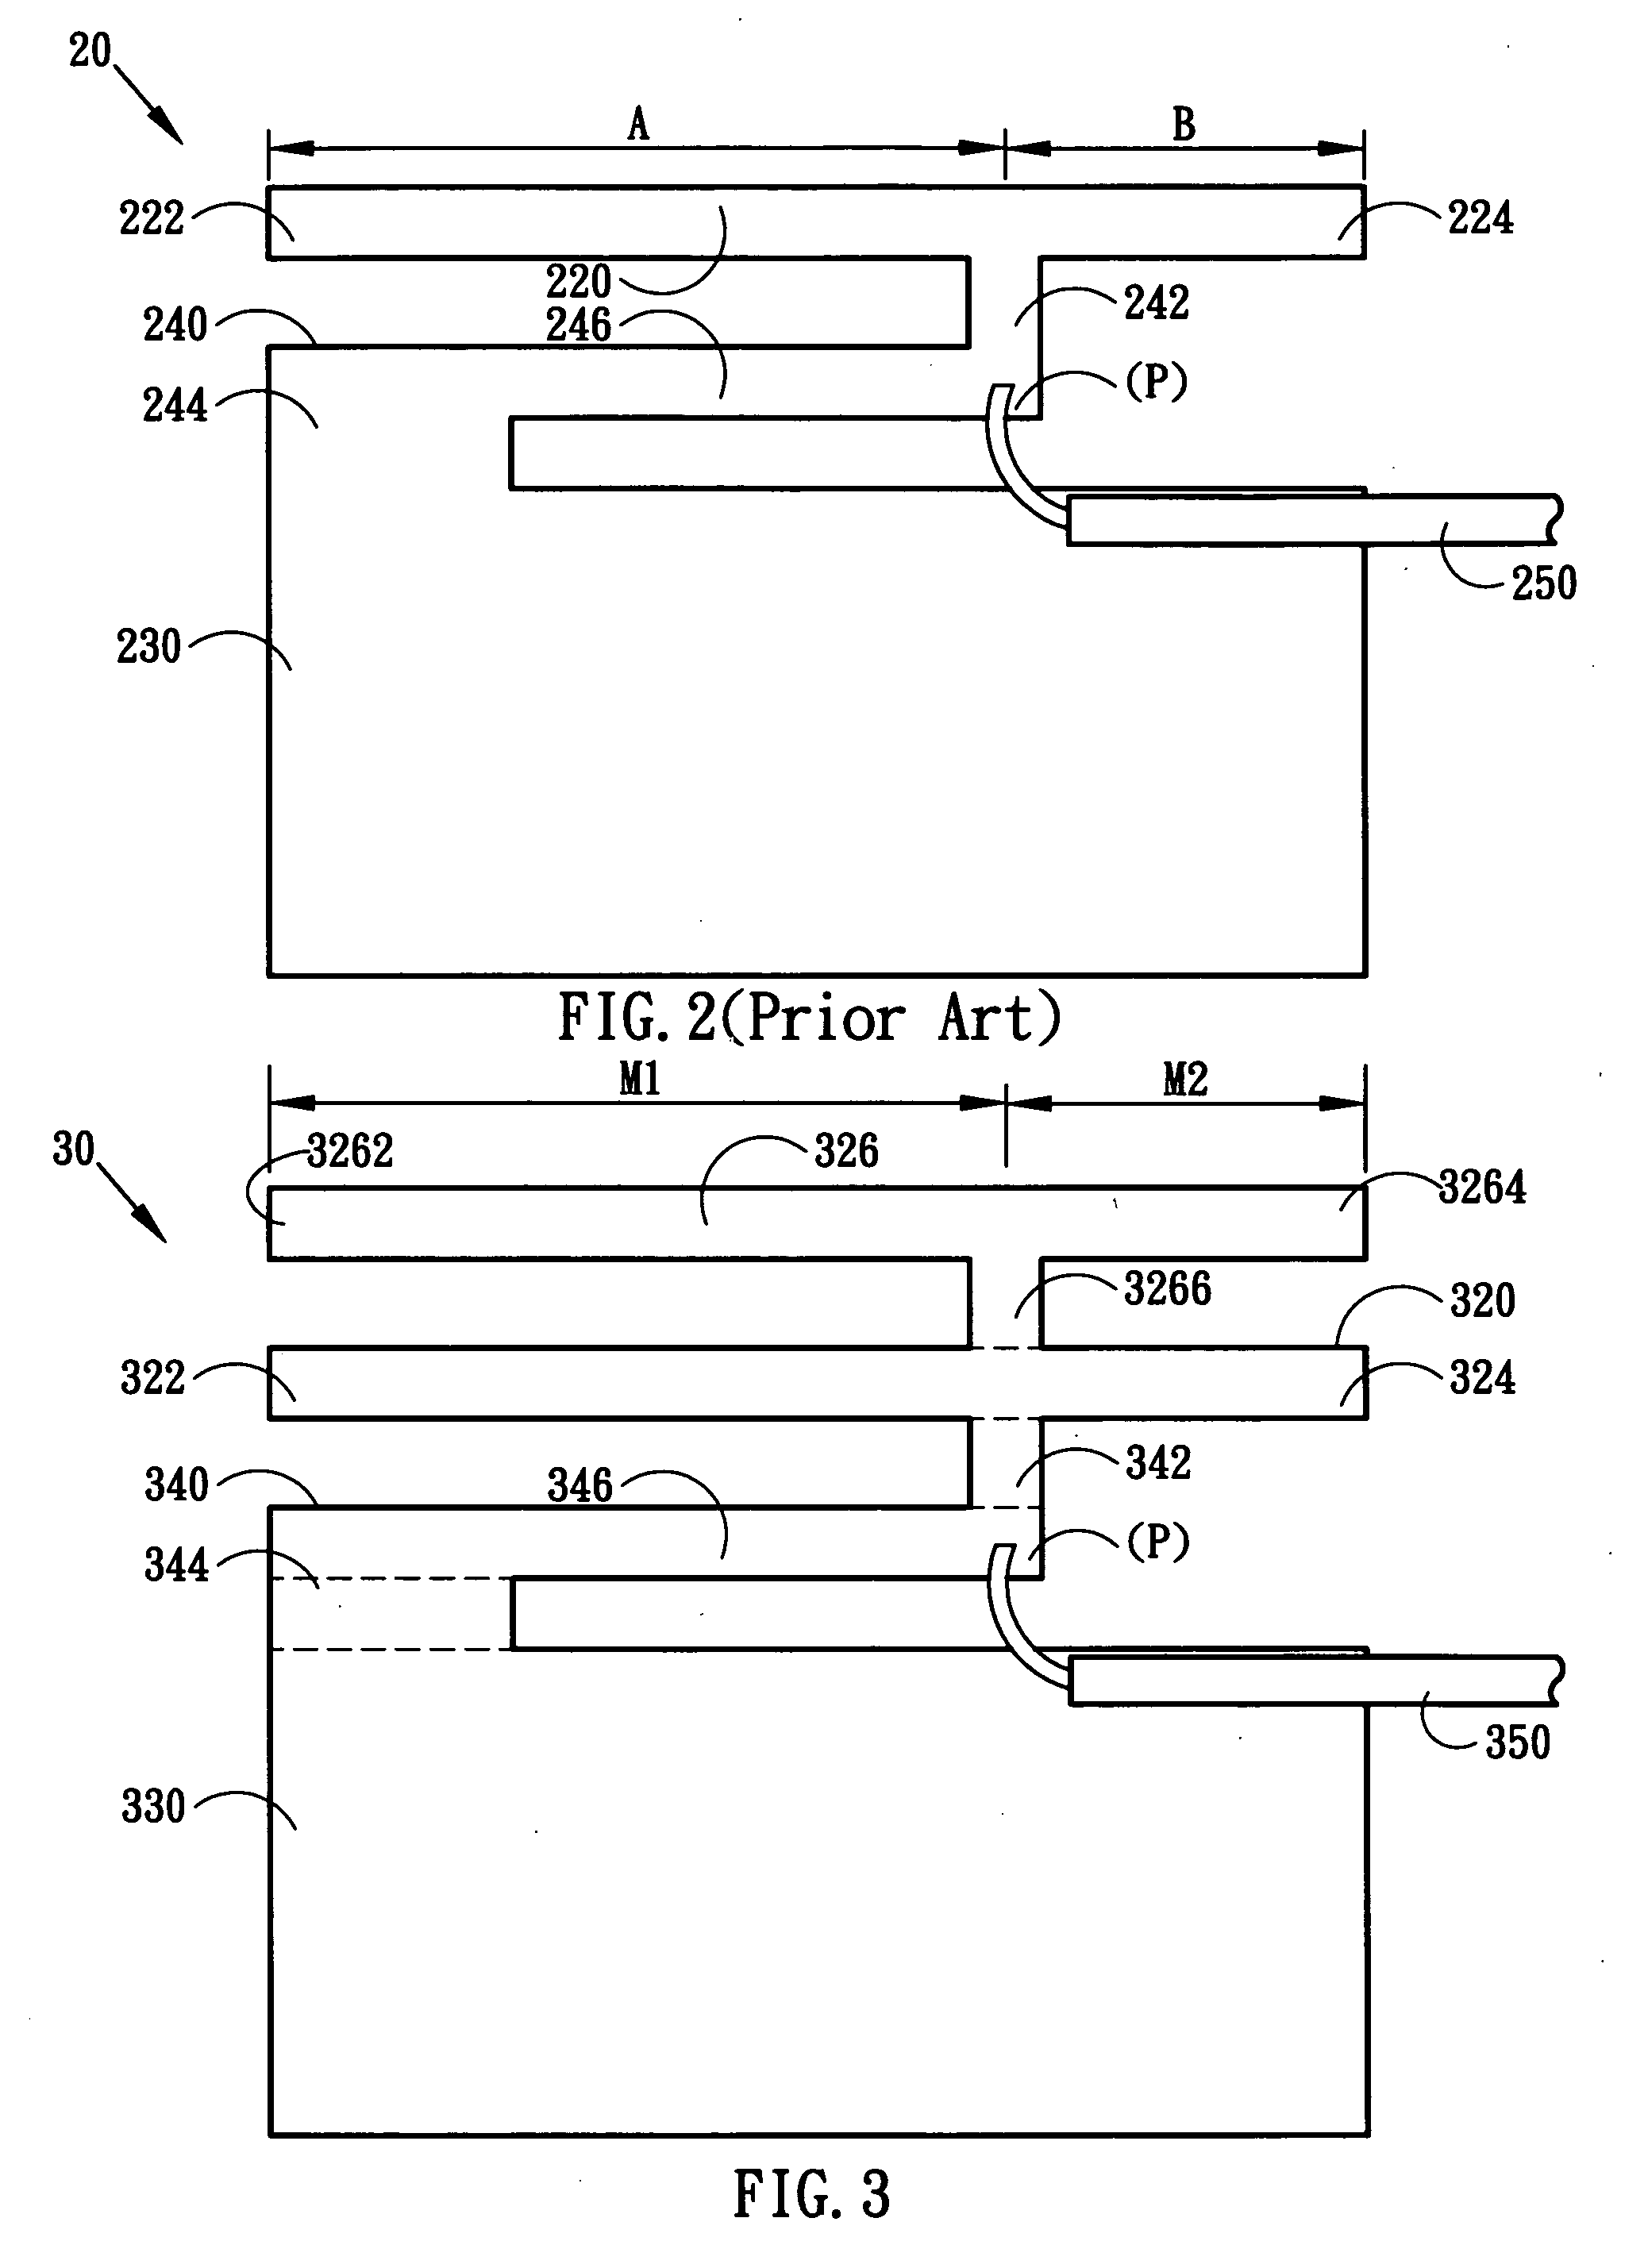 Multifrequency H-shaped antenna